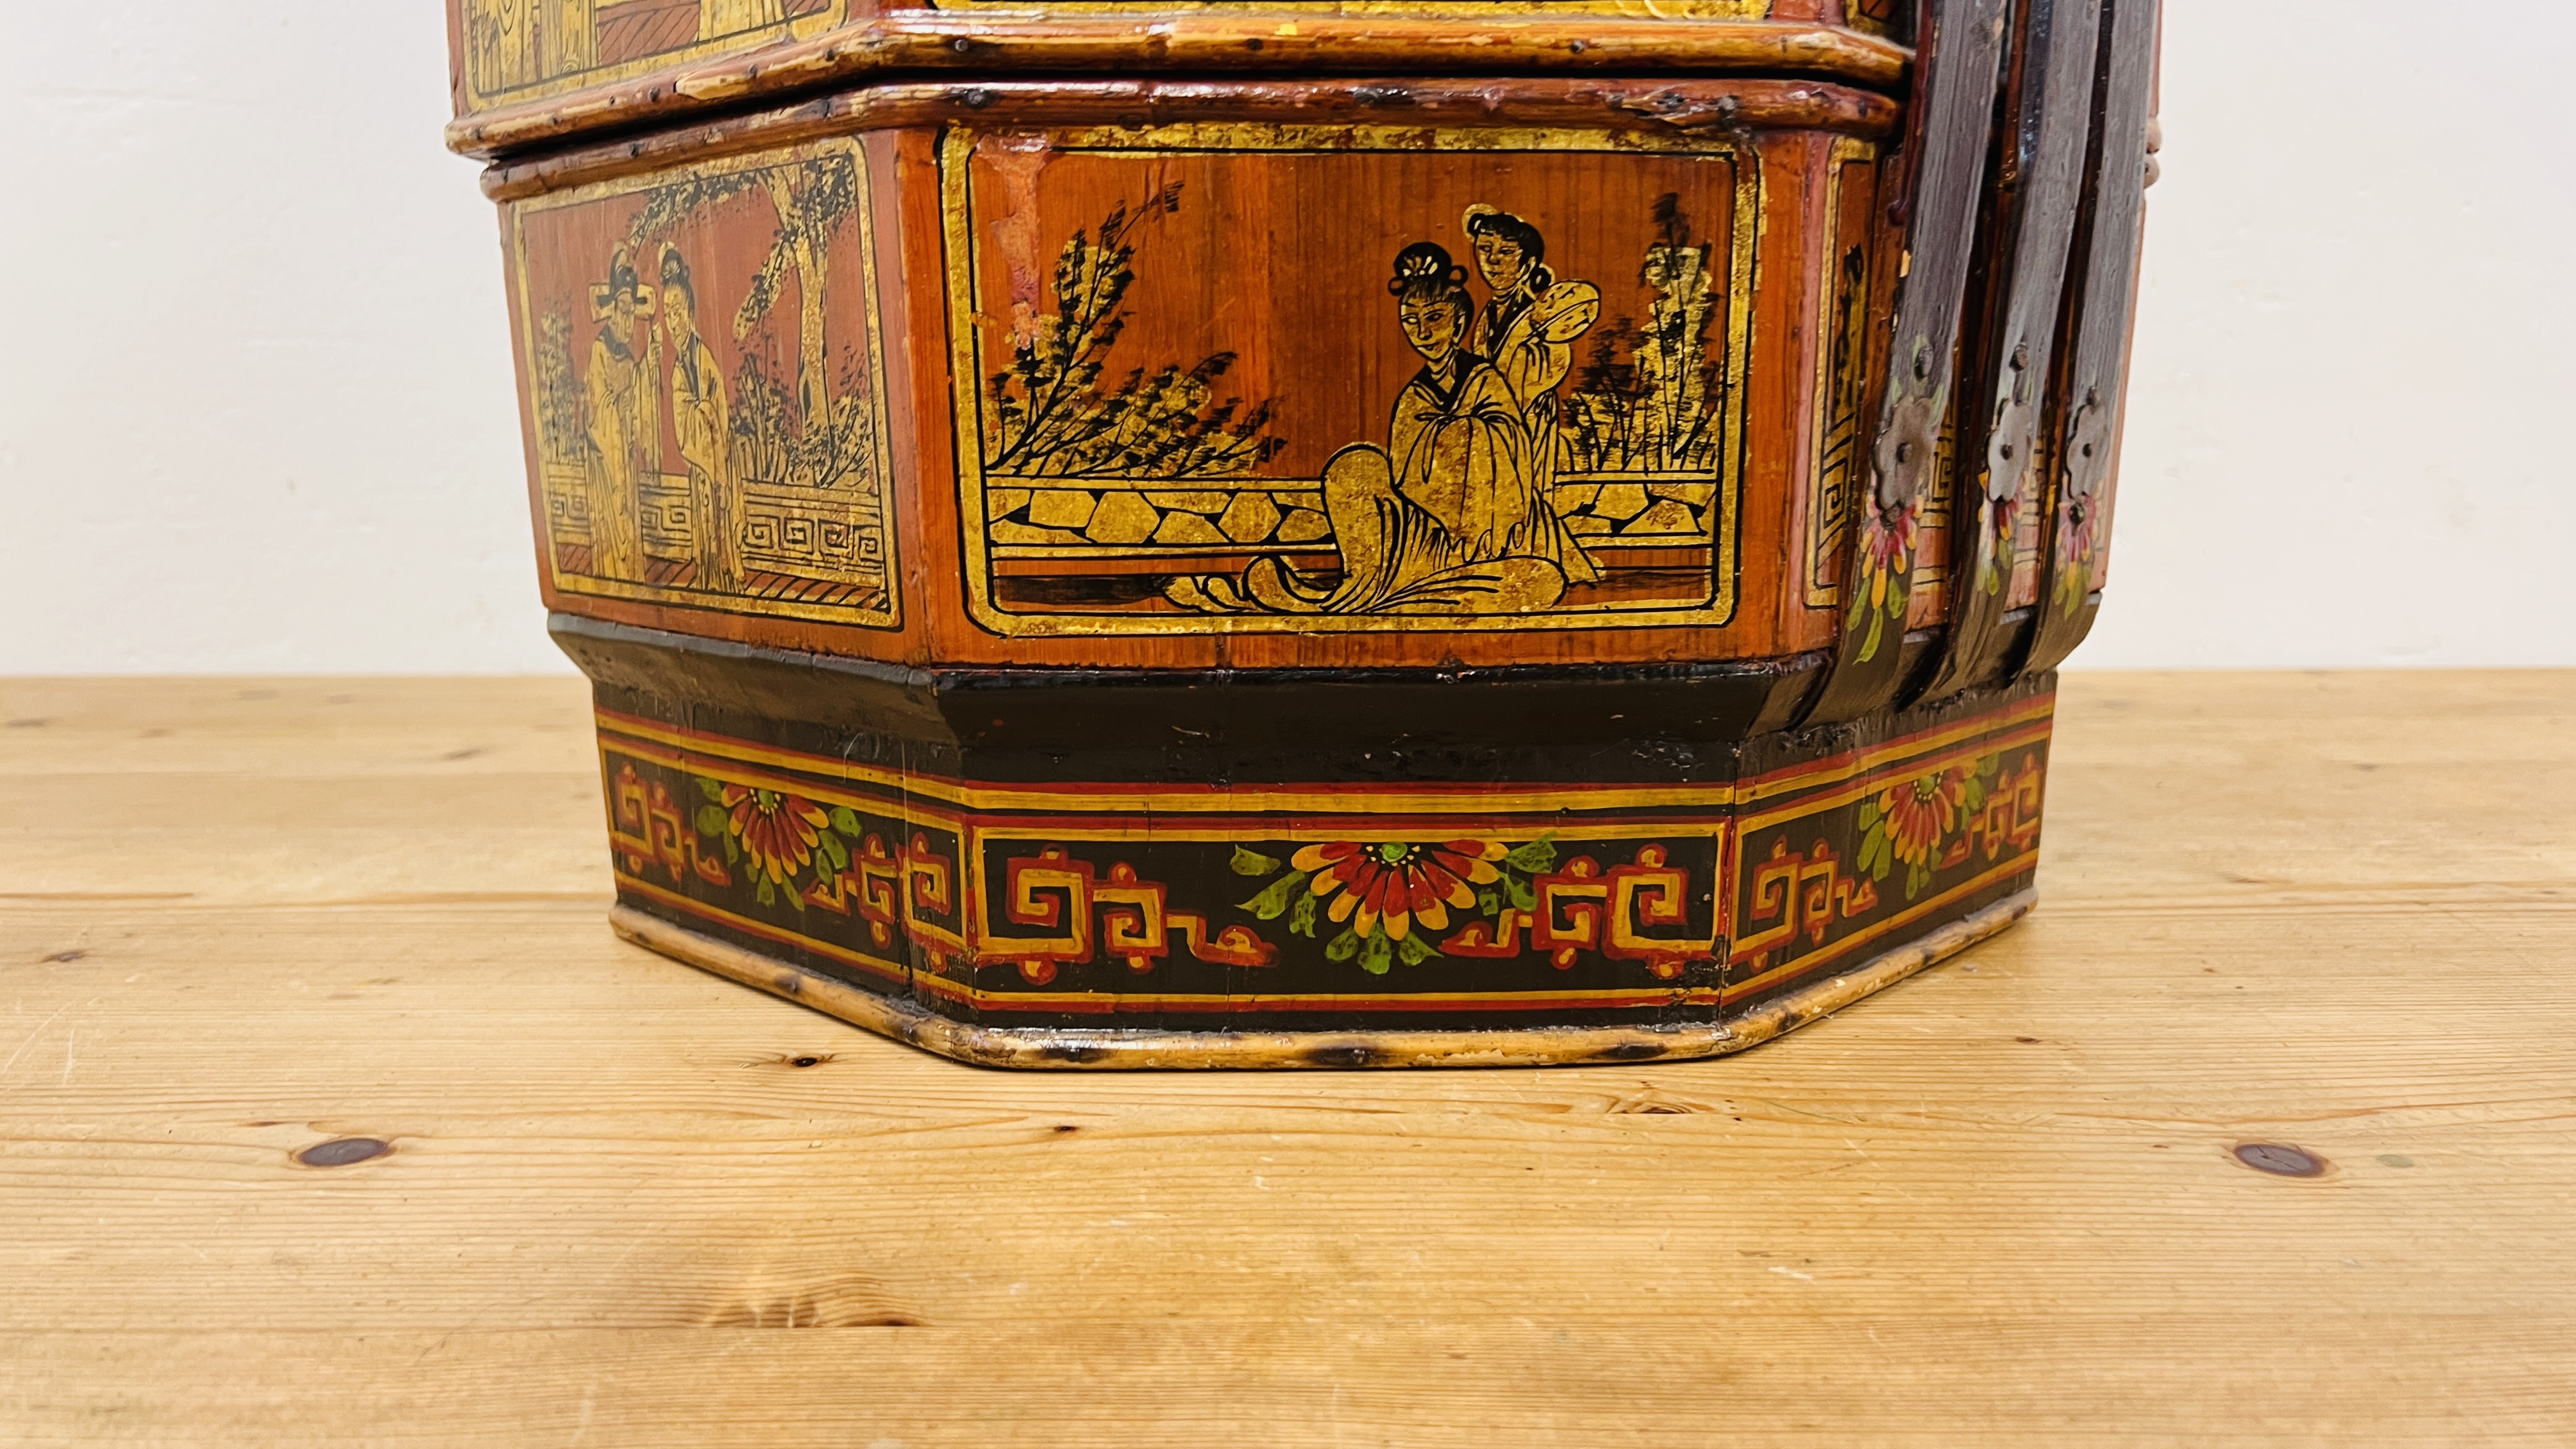 A HIGHLY DECORATIVE GILT DECORATED AND LACQUERED CHINESE WEDDING BASKET - HEIGHT 62CM. - Image 5 of 12